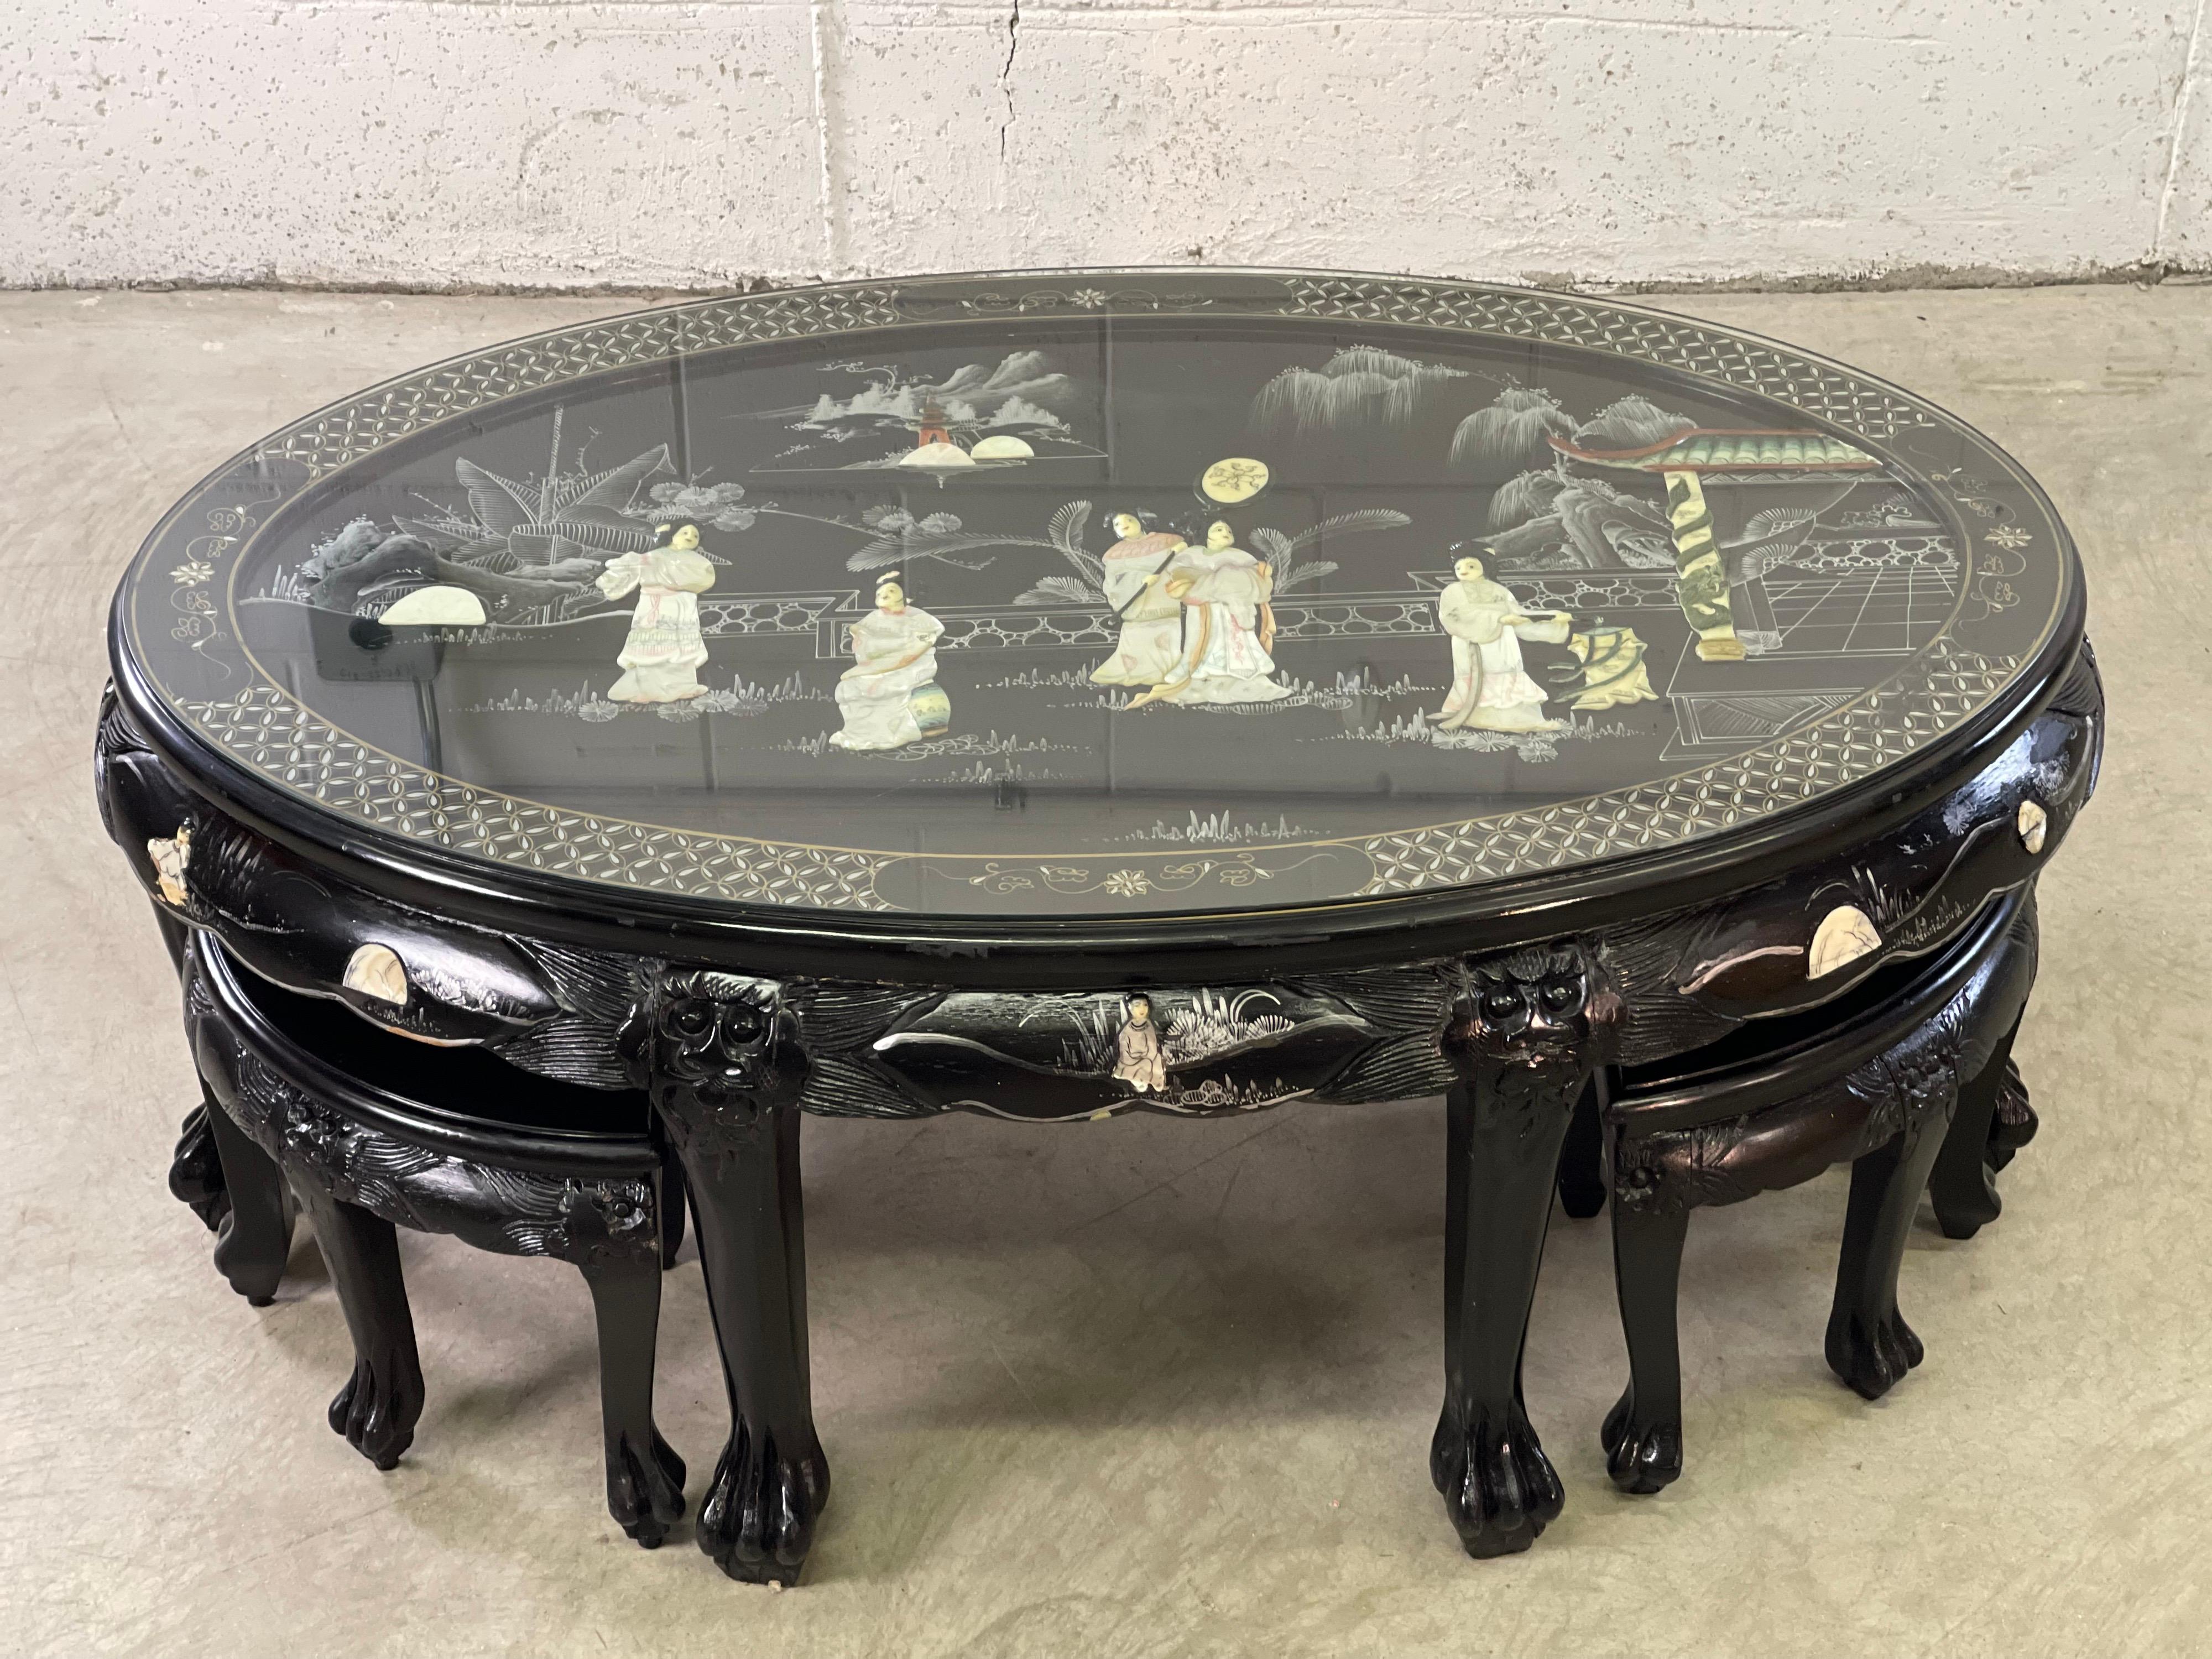 Vintage 1970s Asian style oval black lacquered coffee table with four stools. The table has multiple Asian scenes with bone and mother-of-pearl inlay. The table has carved claw feet. The table also has a glass top to protect the Asian scences. The